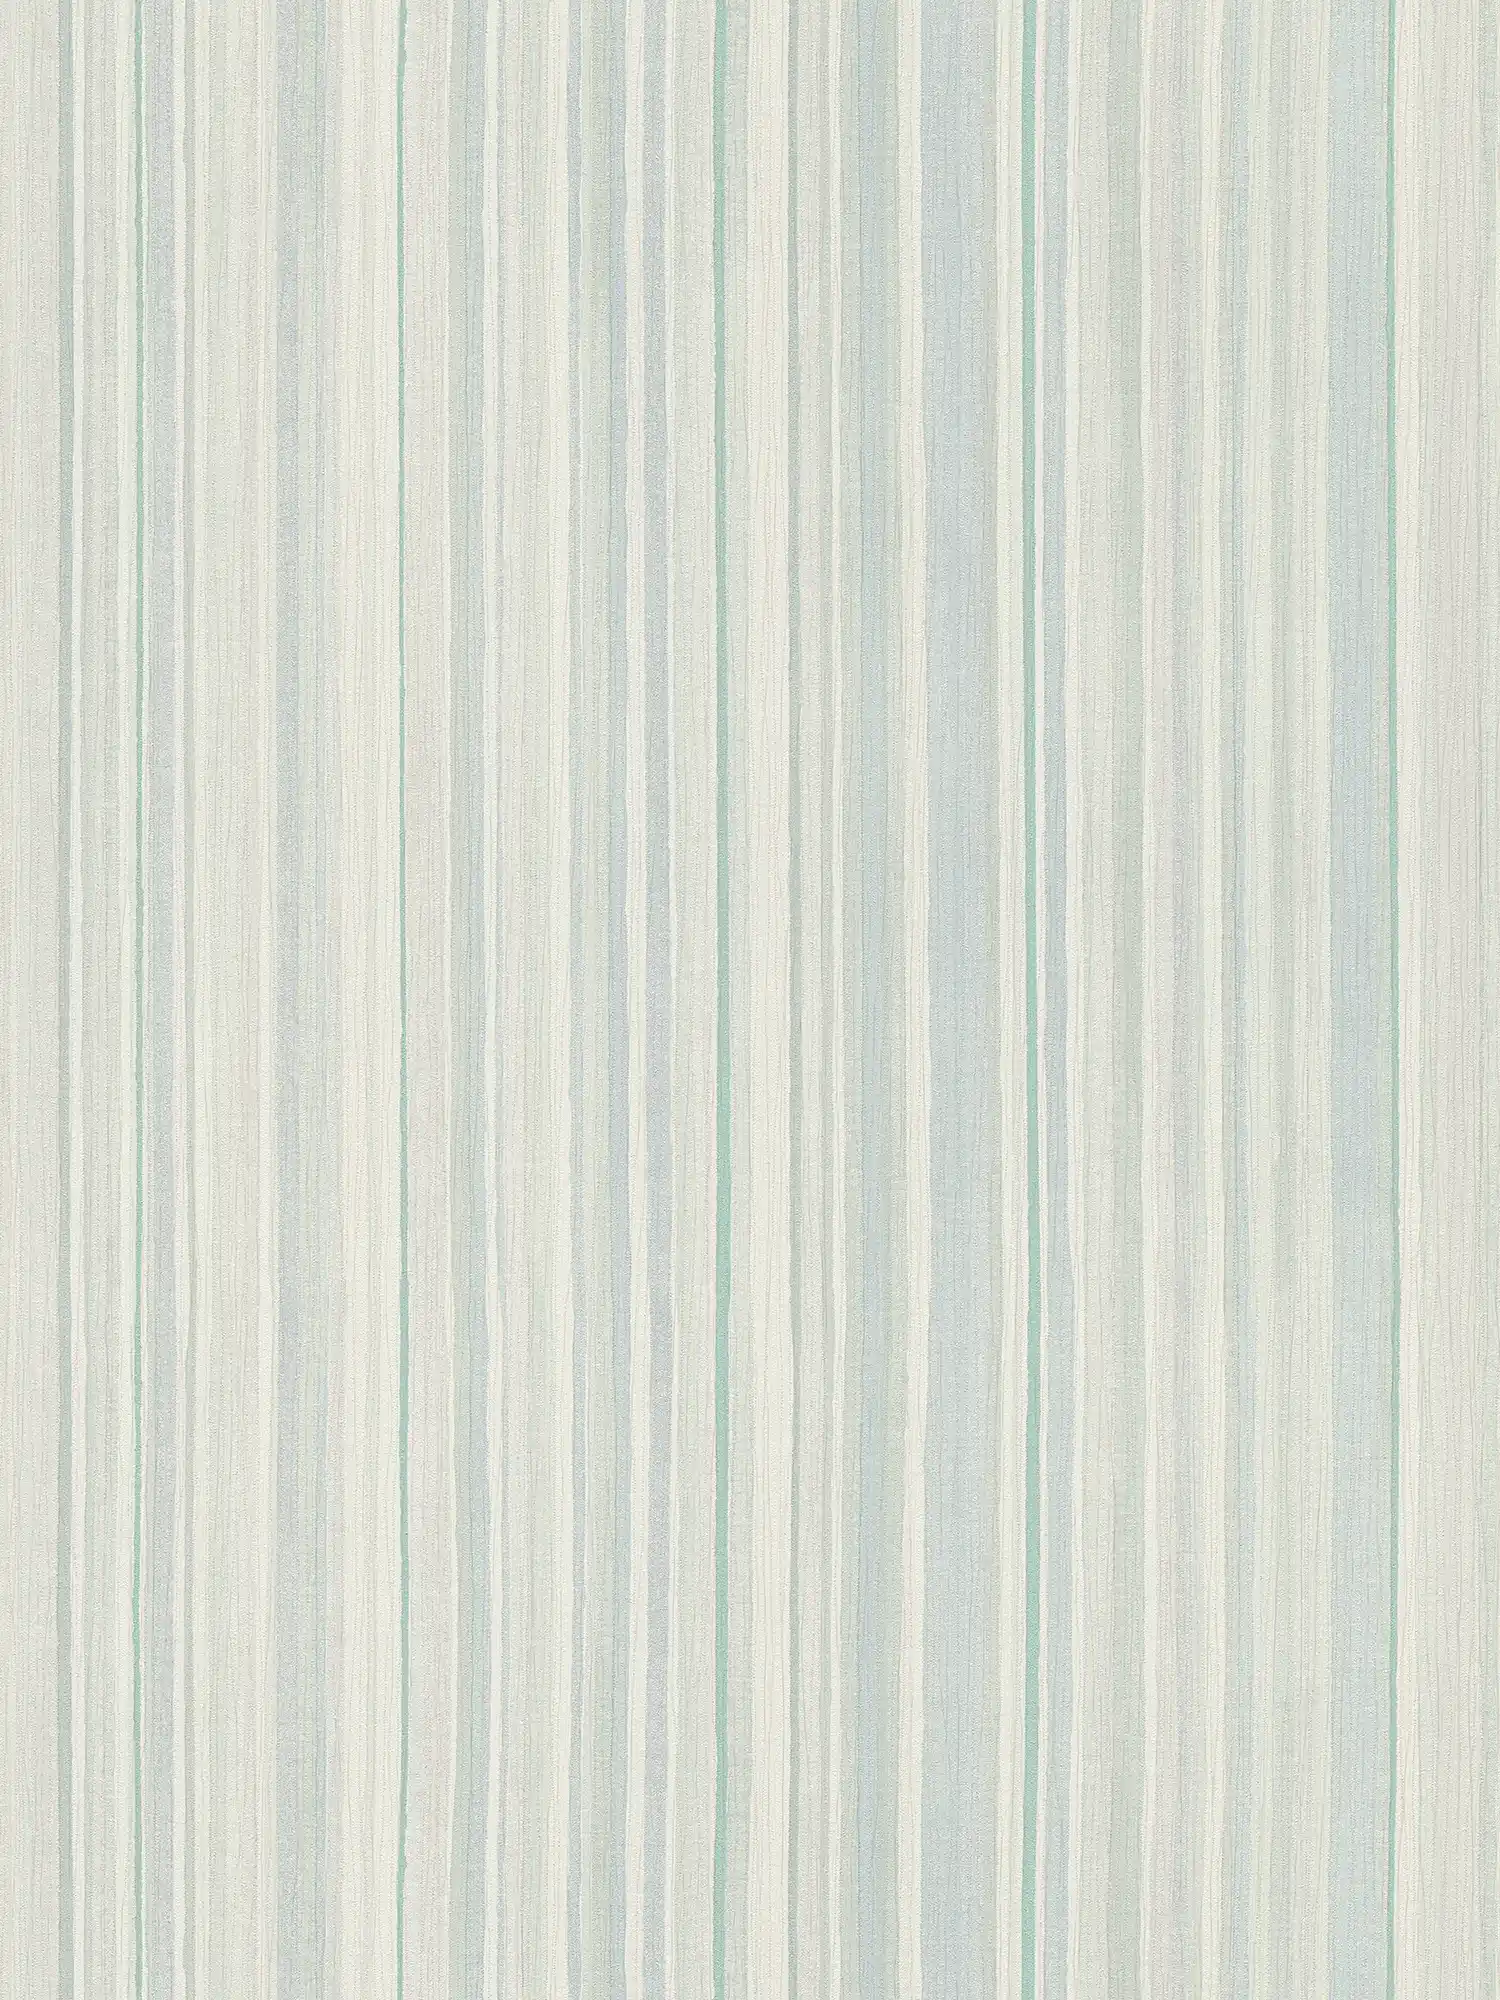 Striped wallpaper with line pattern - blue, green, grey
